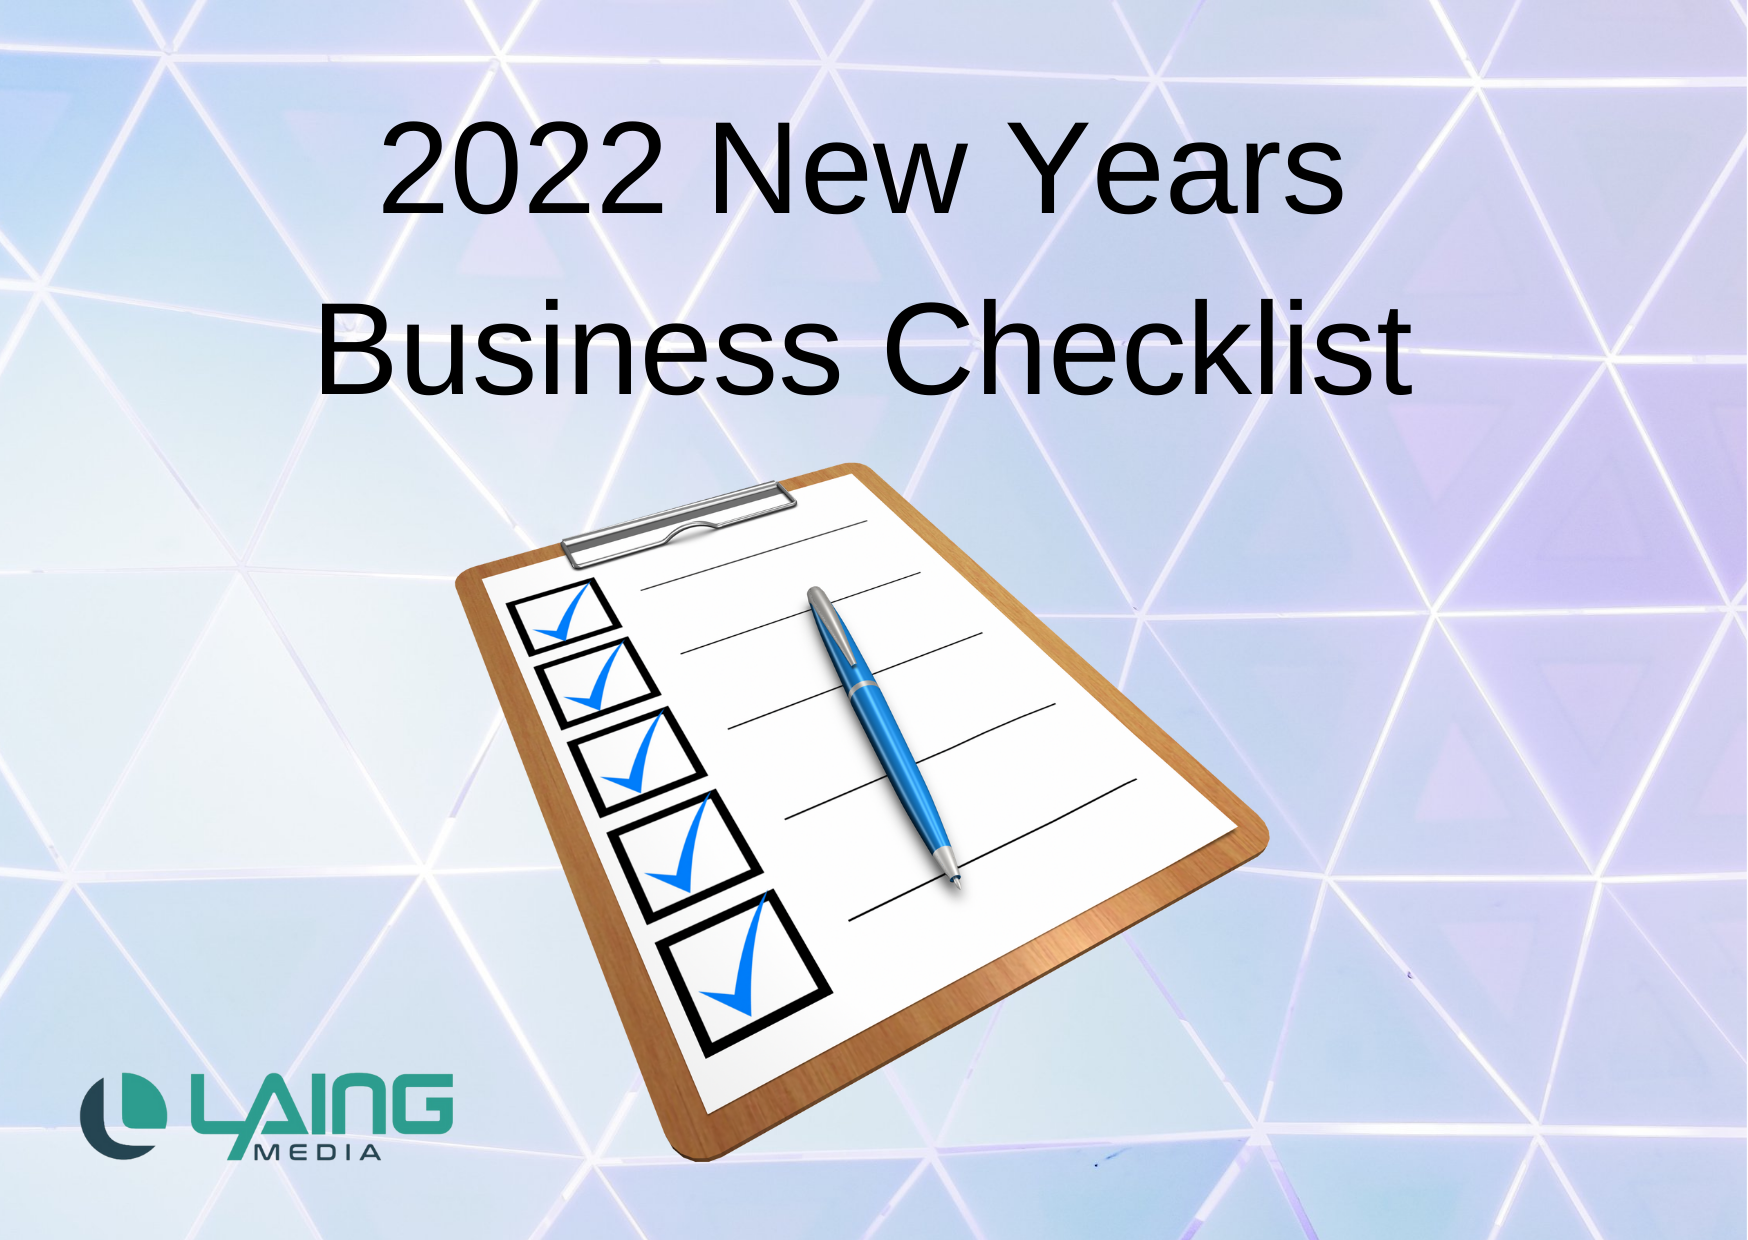 2022 New Years Business Checklist